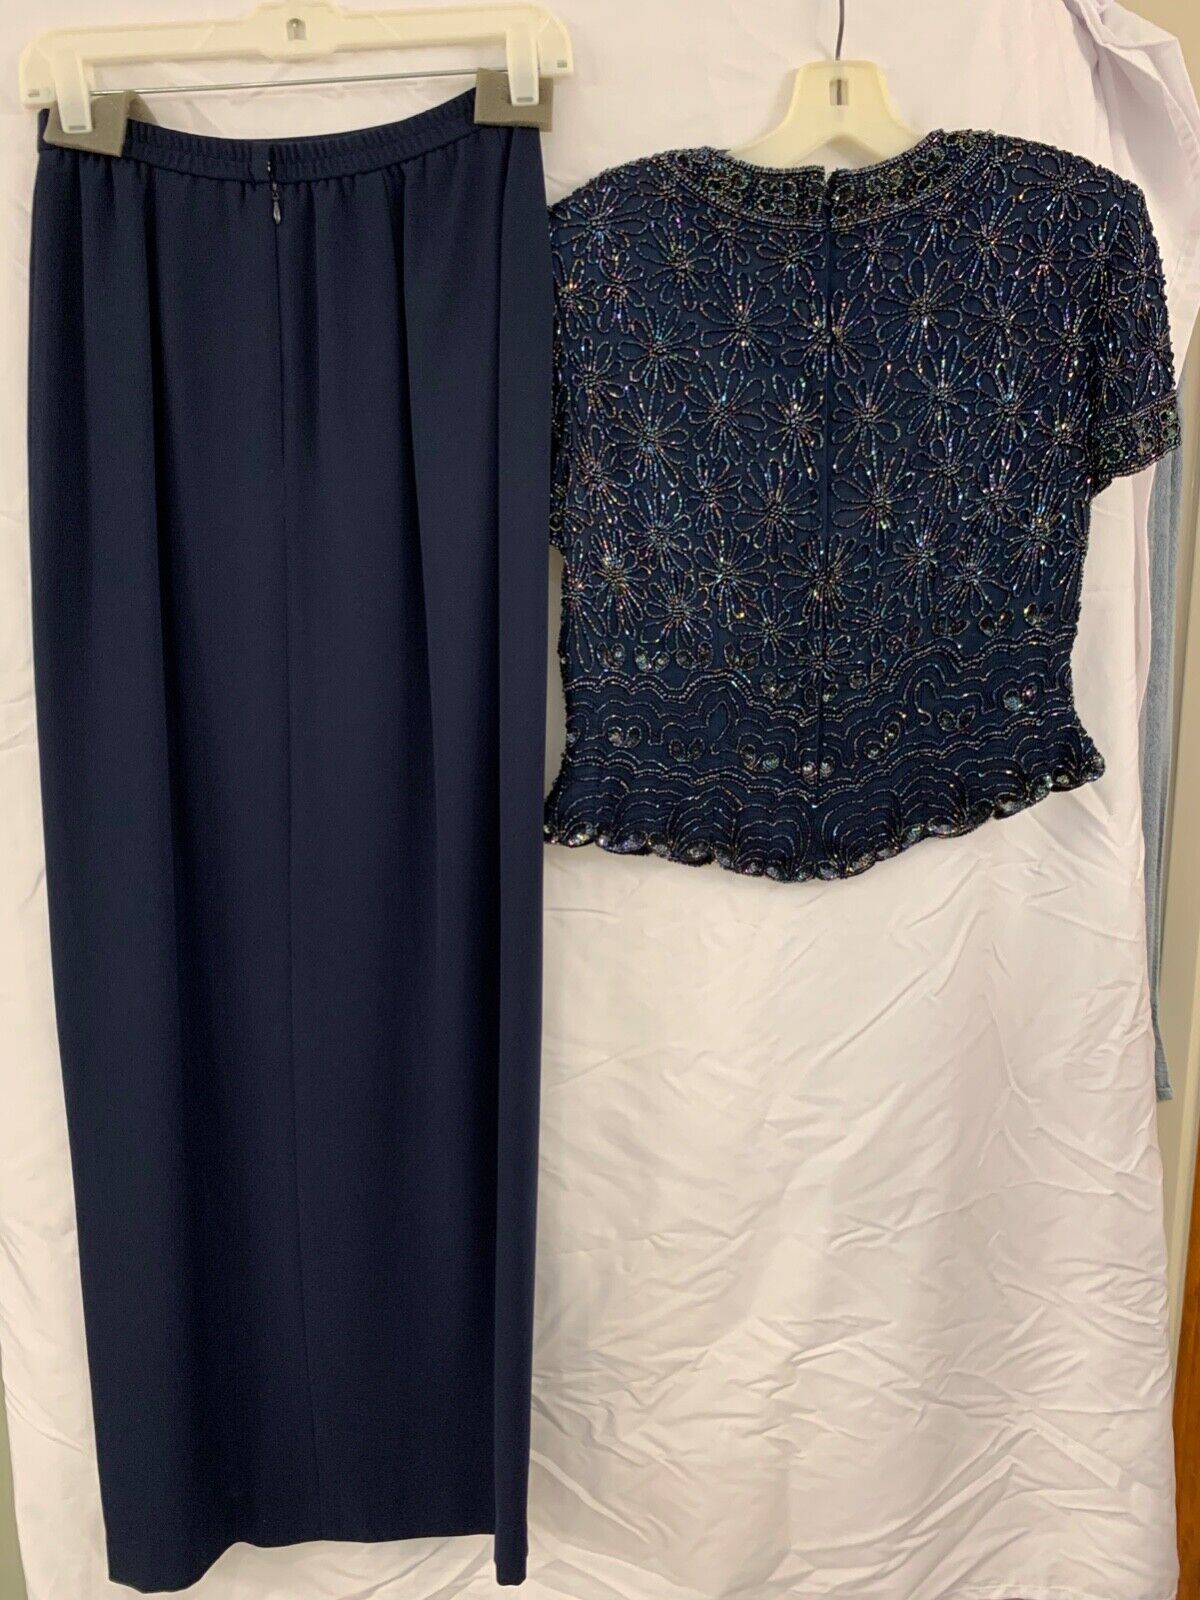 Dress Mother of Groom, Formal,Evening Navy Blue size 4 Adrianna Papell Worn Once Без бренда - фотография #4